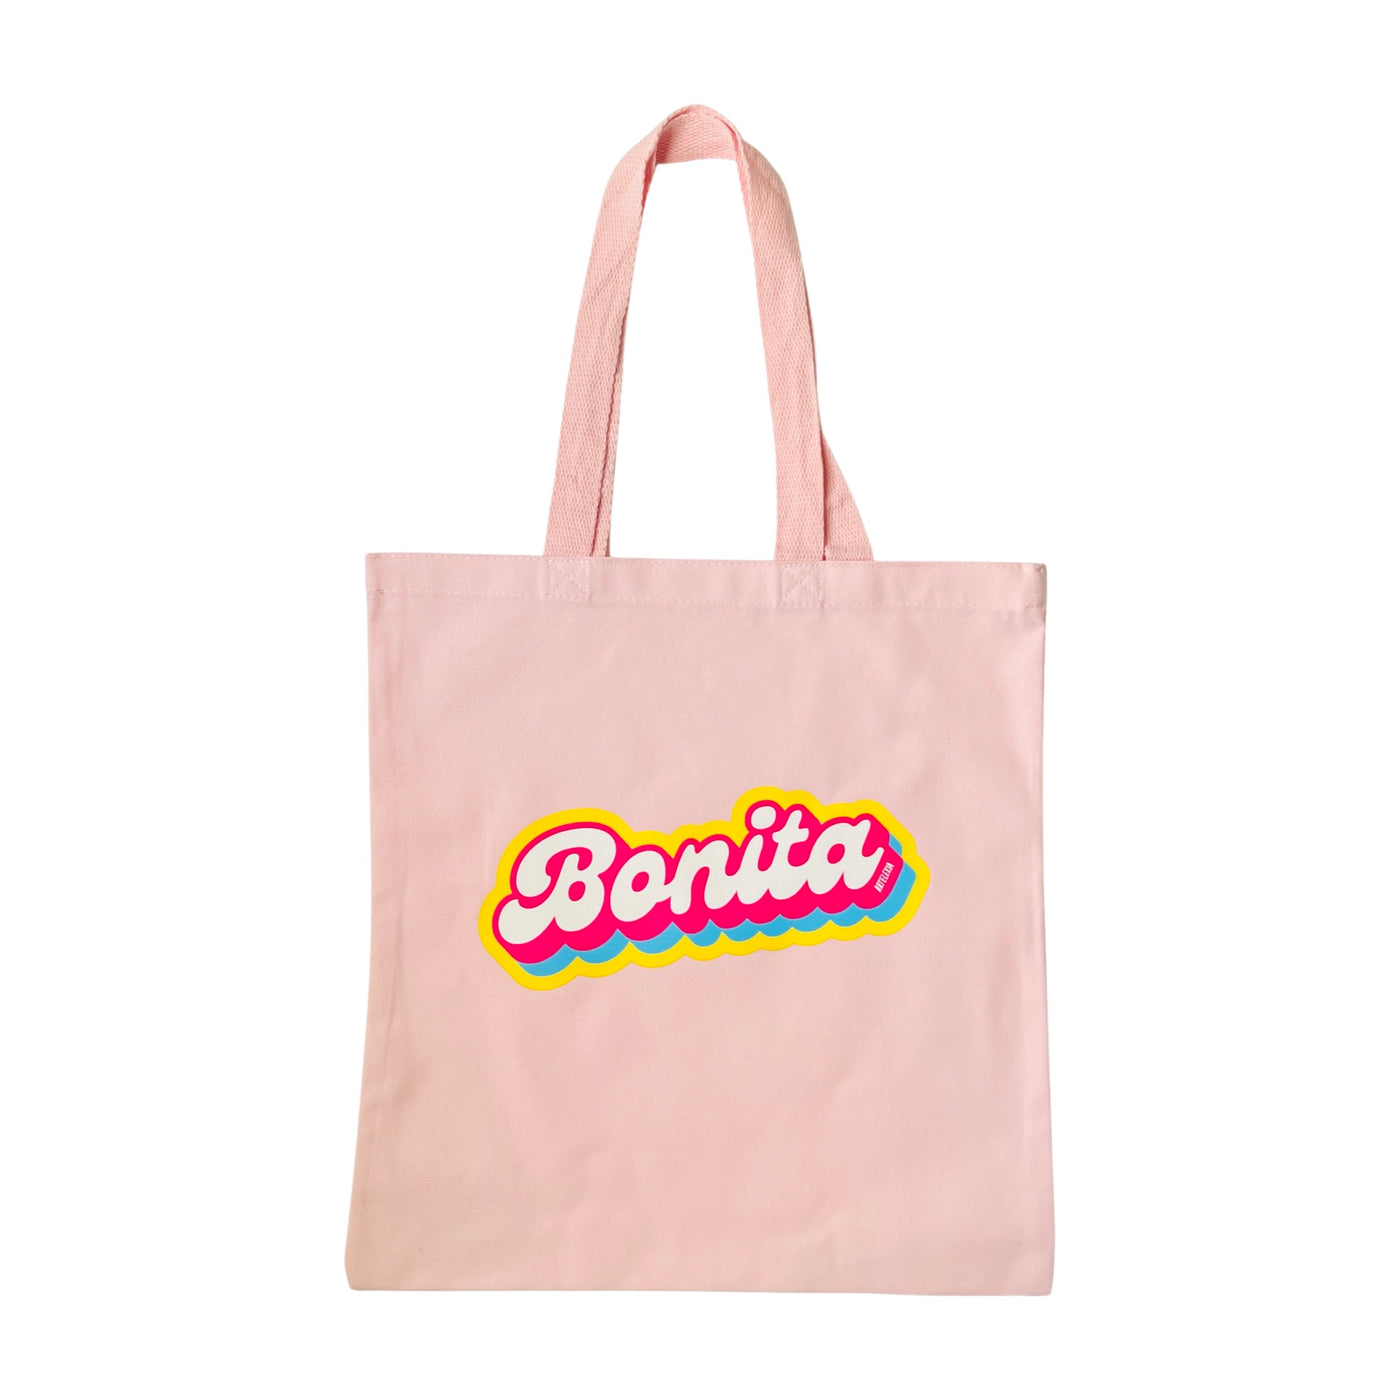 Light pink convas tote bag with the word Bonita in white lettering and outlined in pink, blue and yellow.